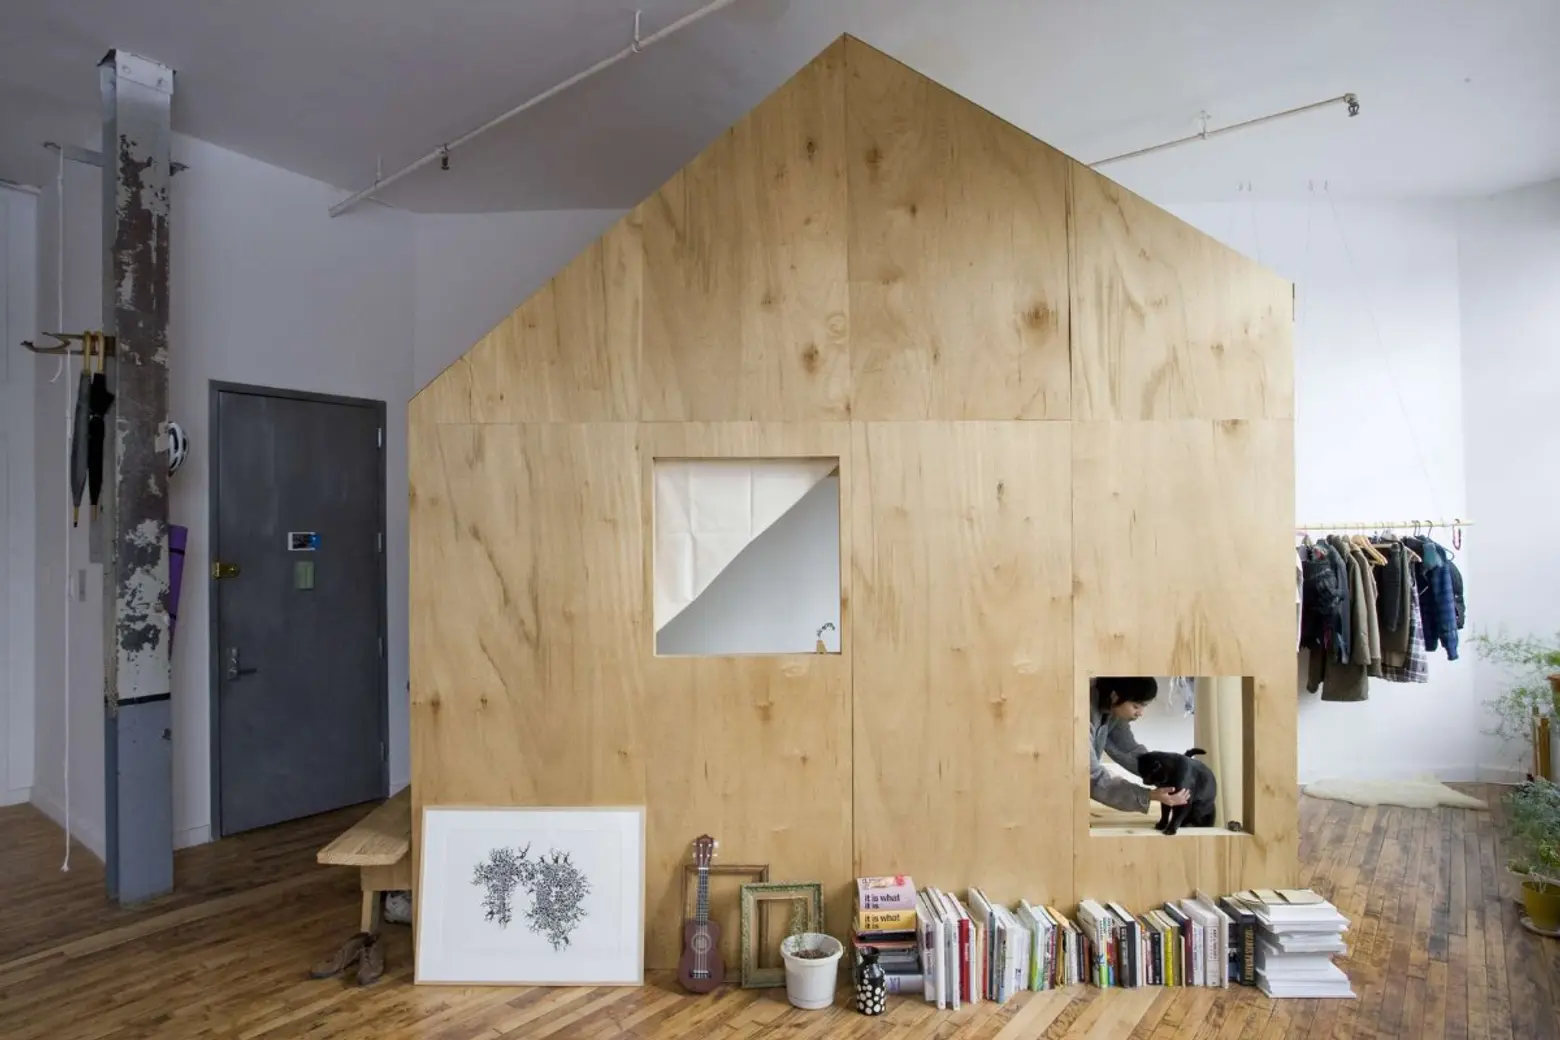 Brooklyn’s ‘A Cabin in a Loft’ Transforms a Space with Two Treehouse-Like Bedrooms